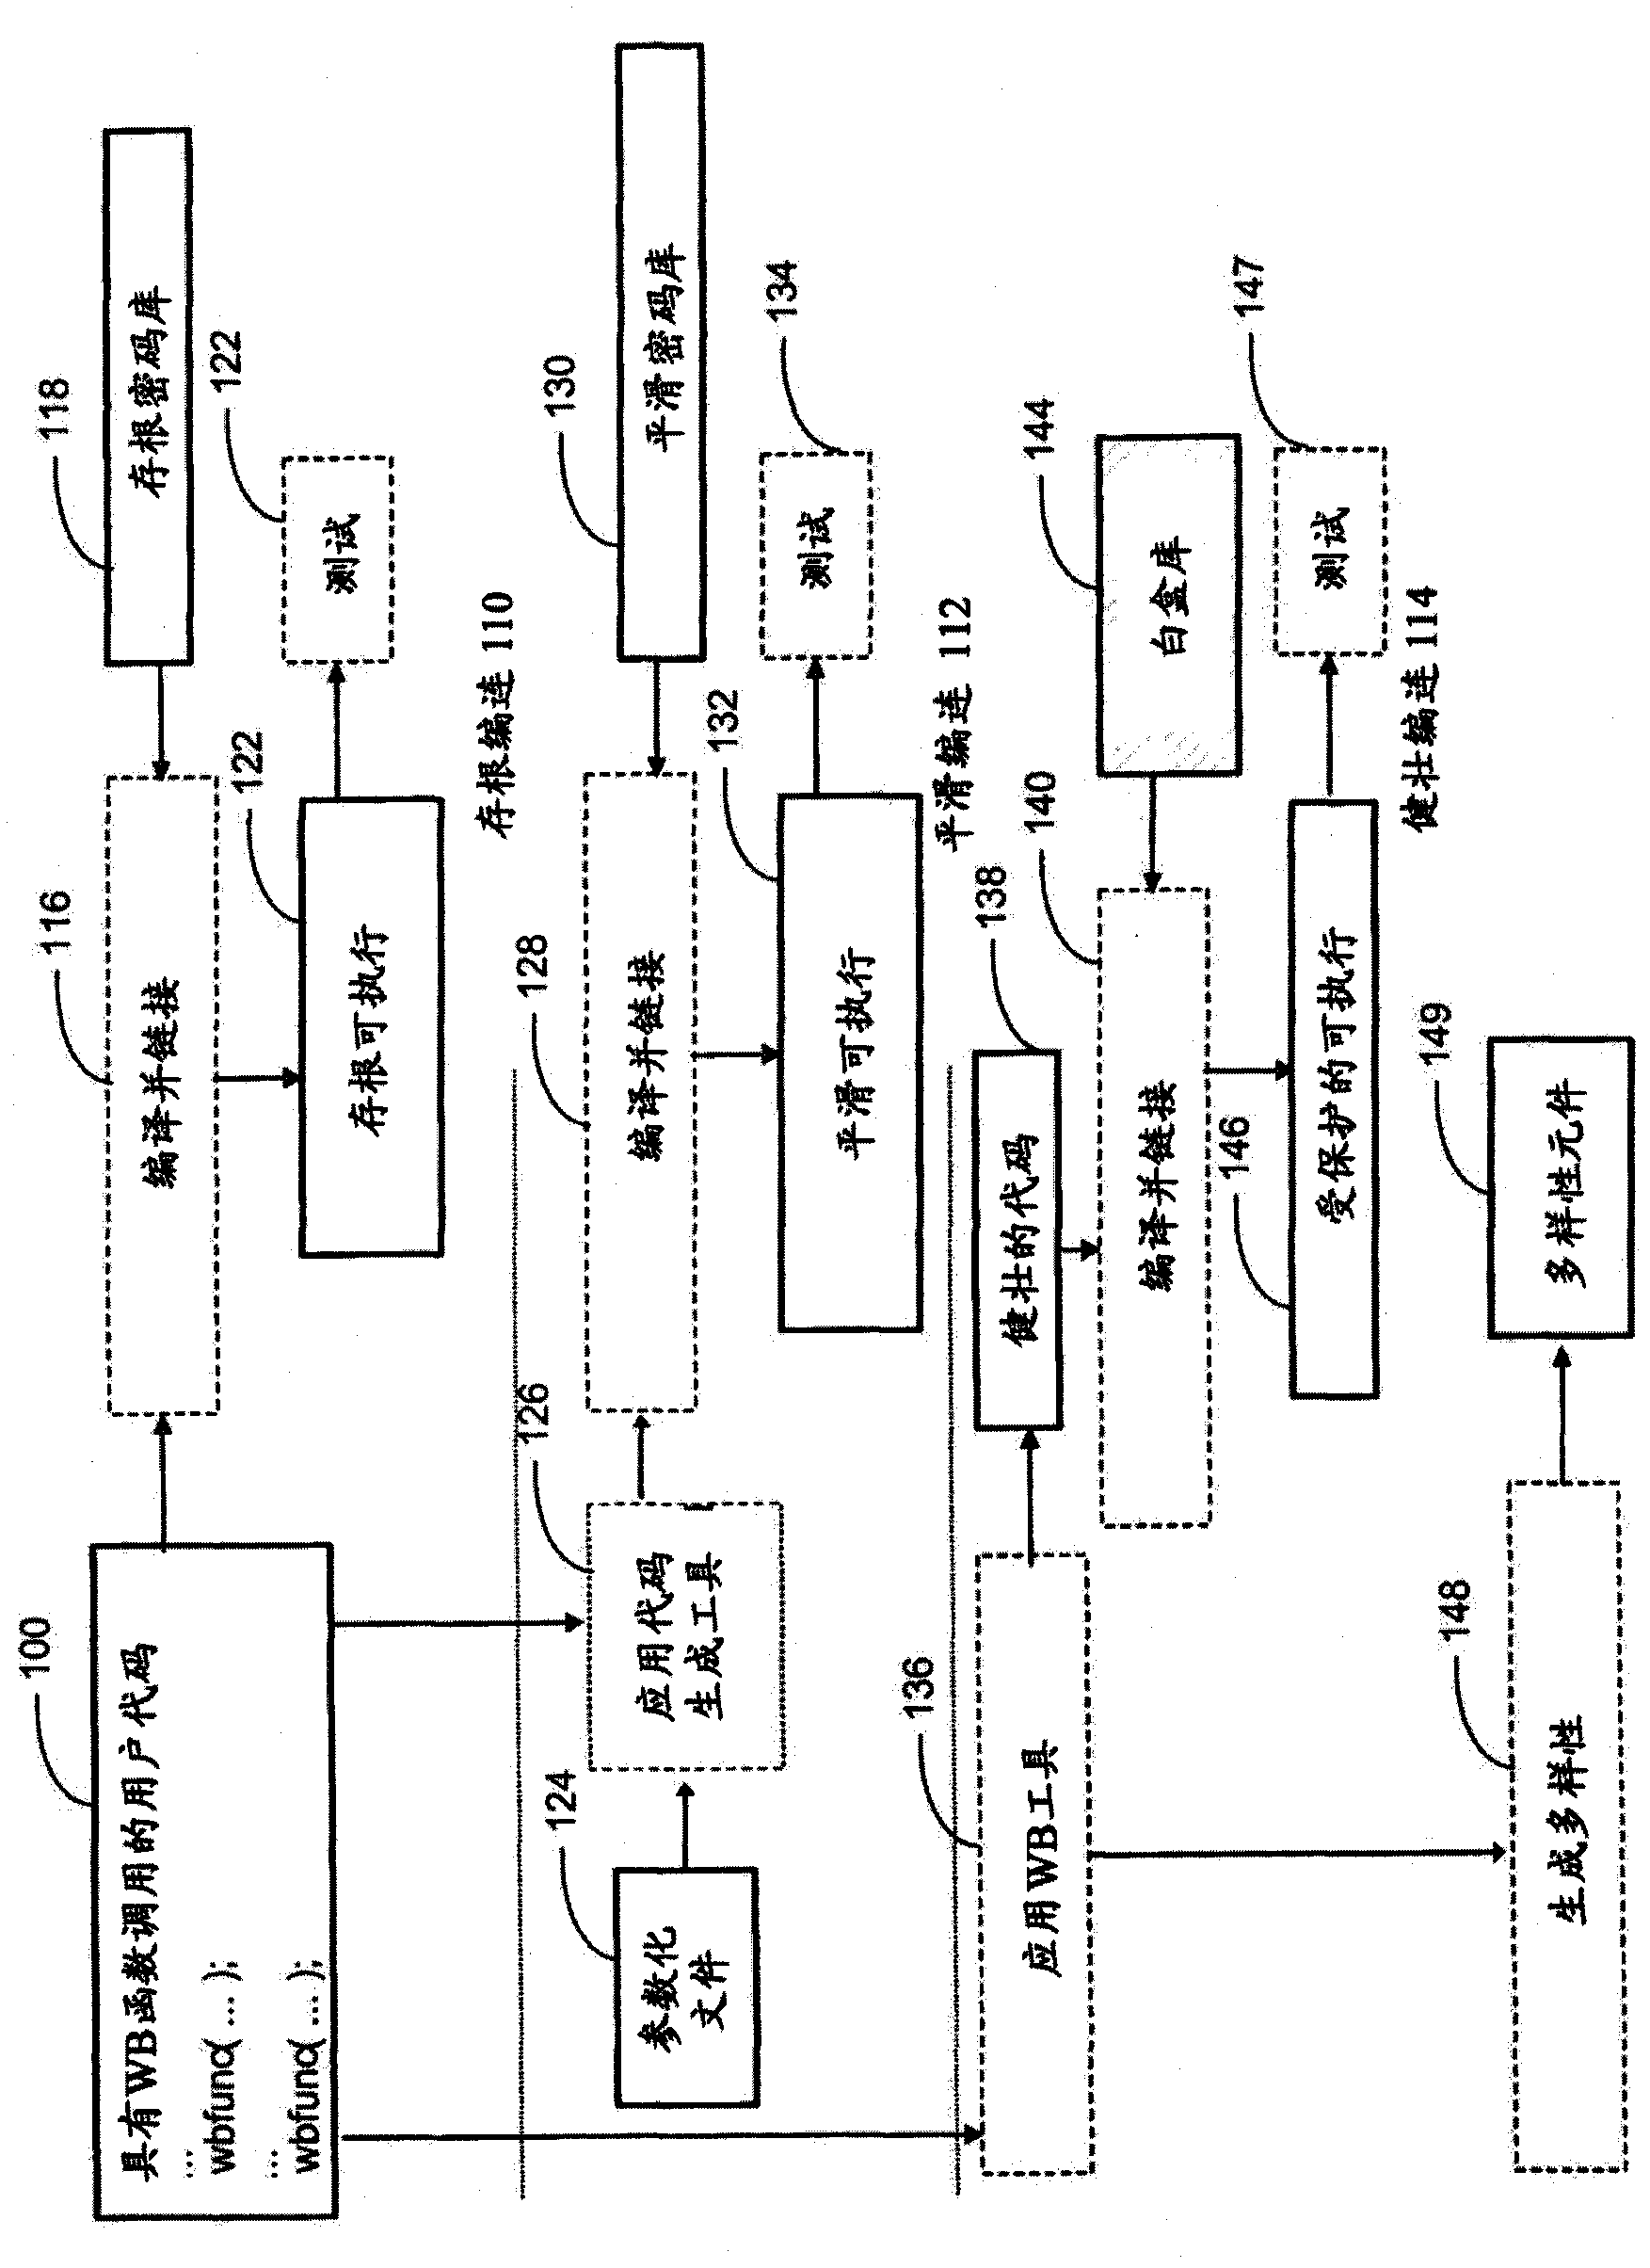 System and method for generating white-box implementations of software applications